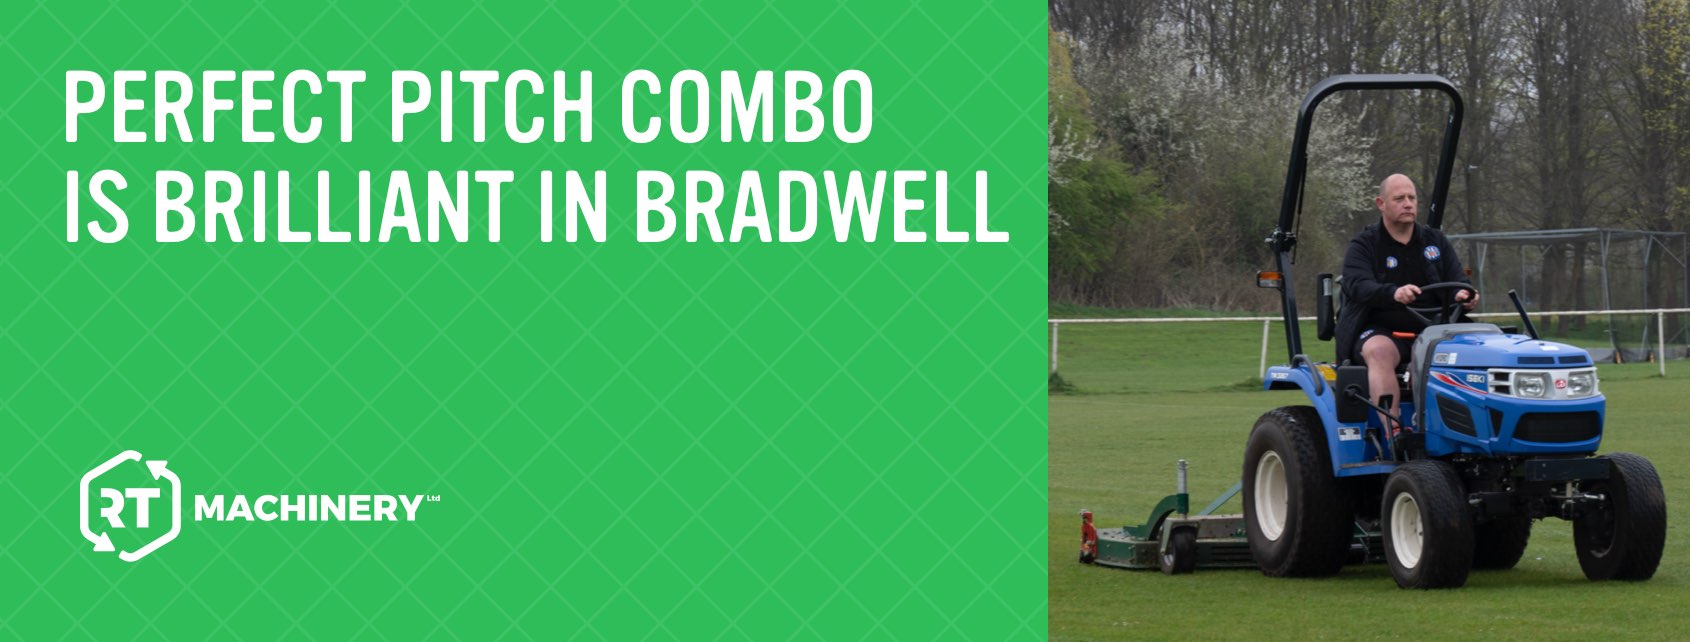 Perfect Pitch Combo is Brilliant in Bradwell